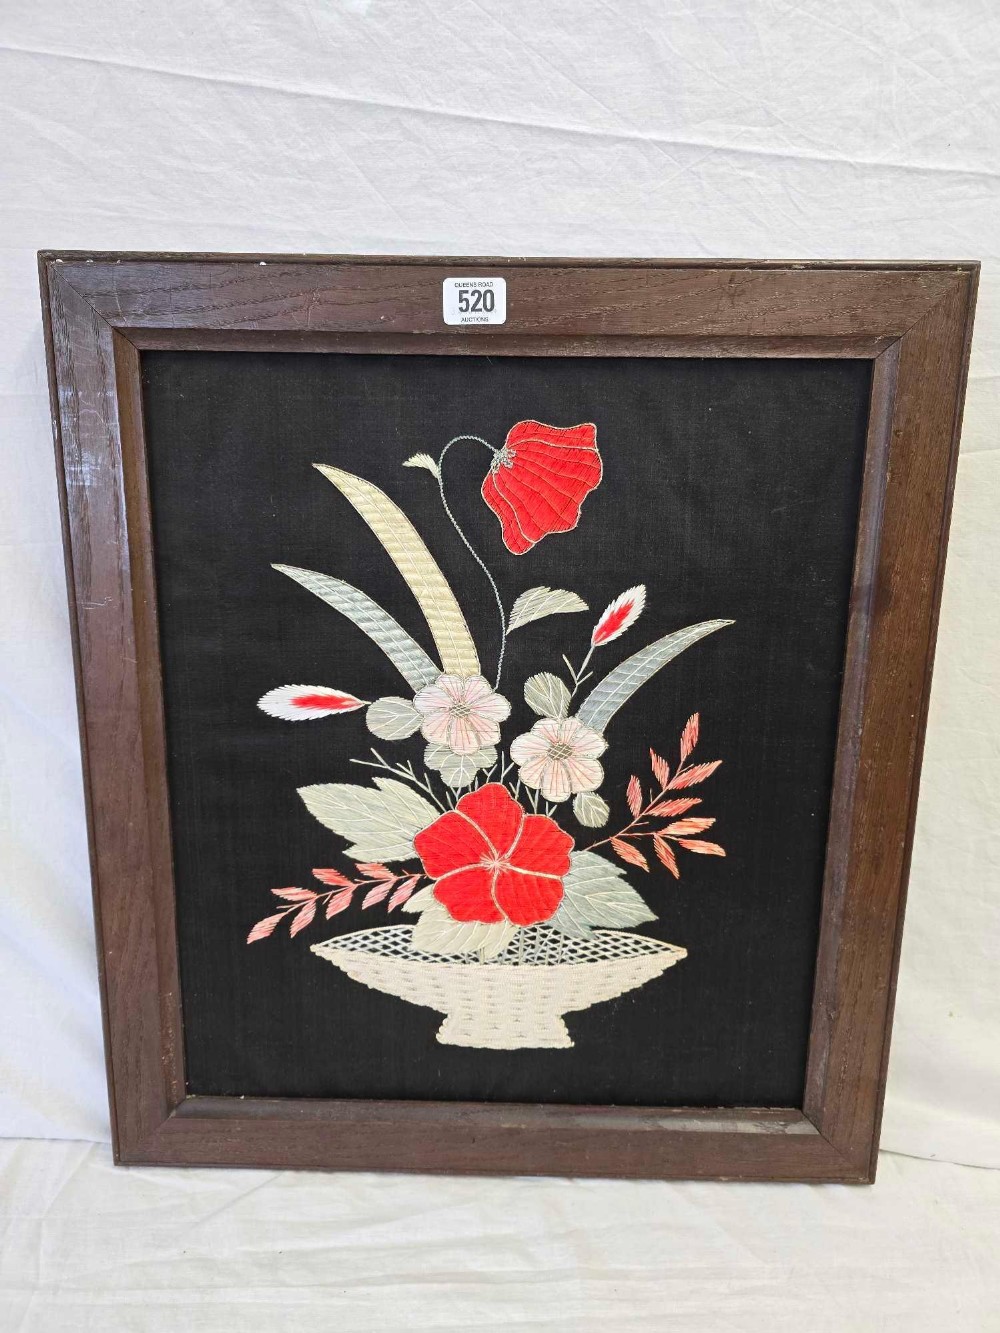 GOOD VICTORIAN SILK WORK TEXTILE PANEL OF FLOWERS IN A BASKET IN AN OLD OAK FRAME,